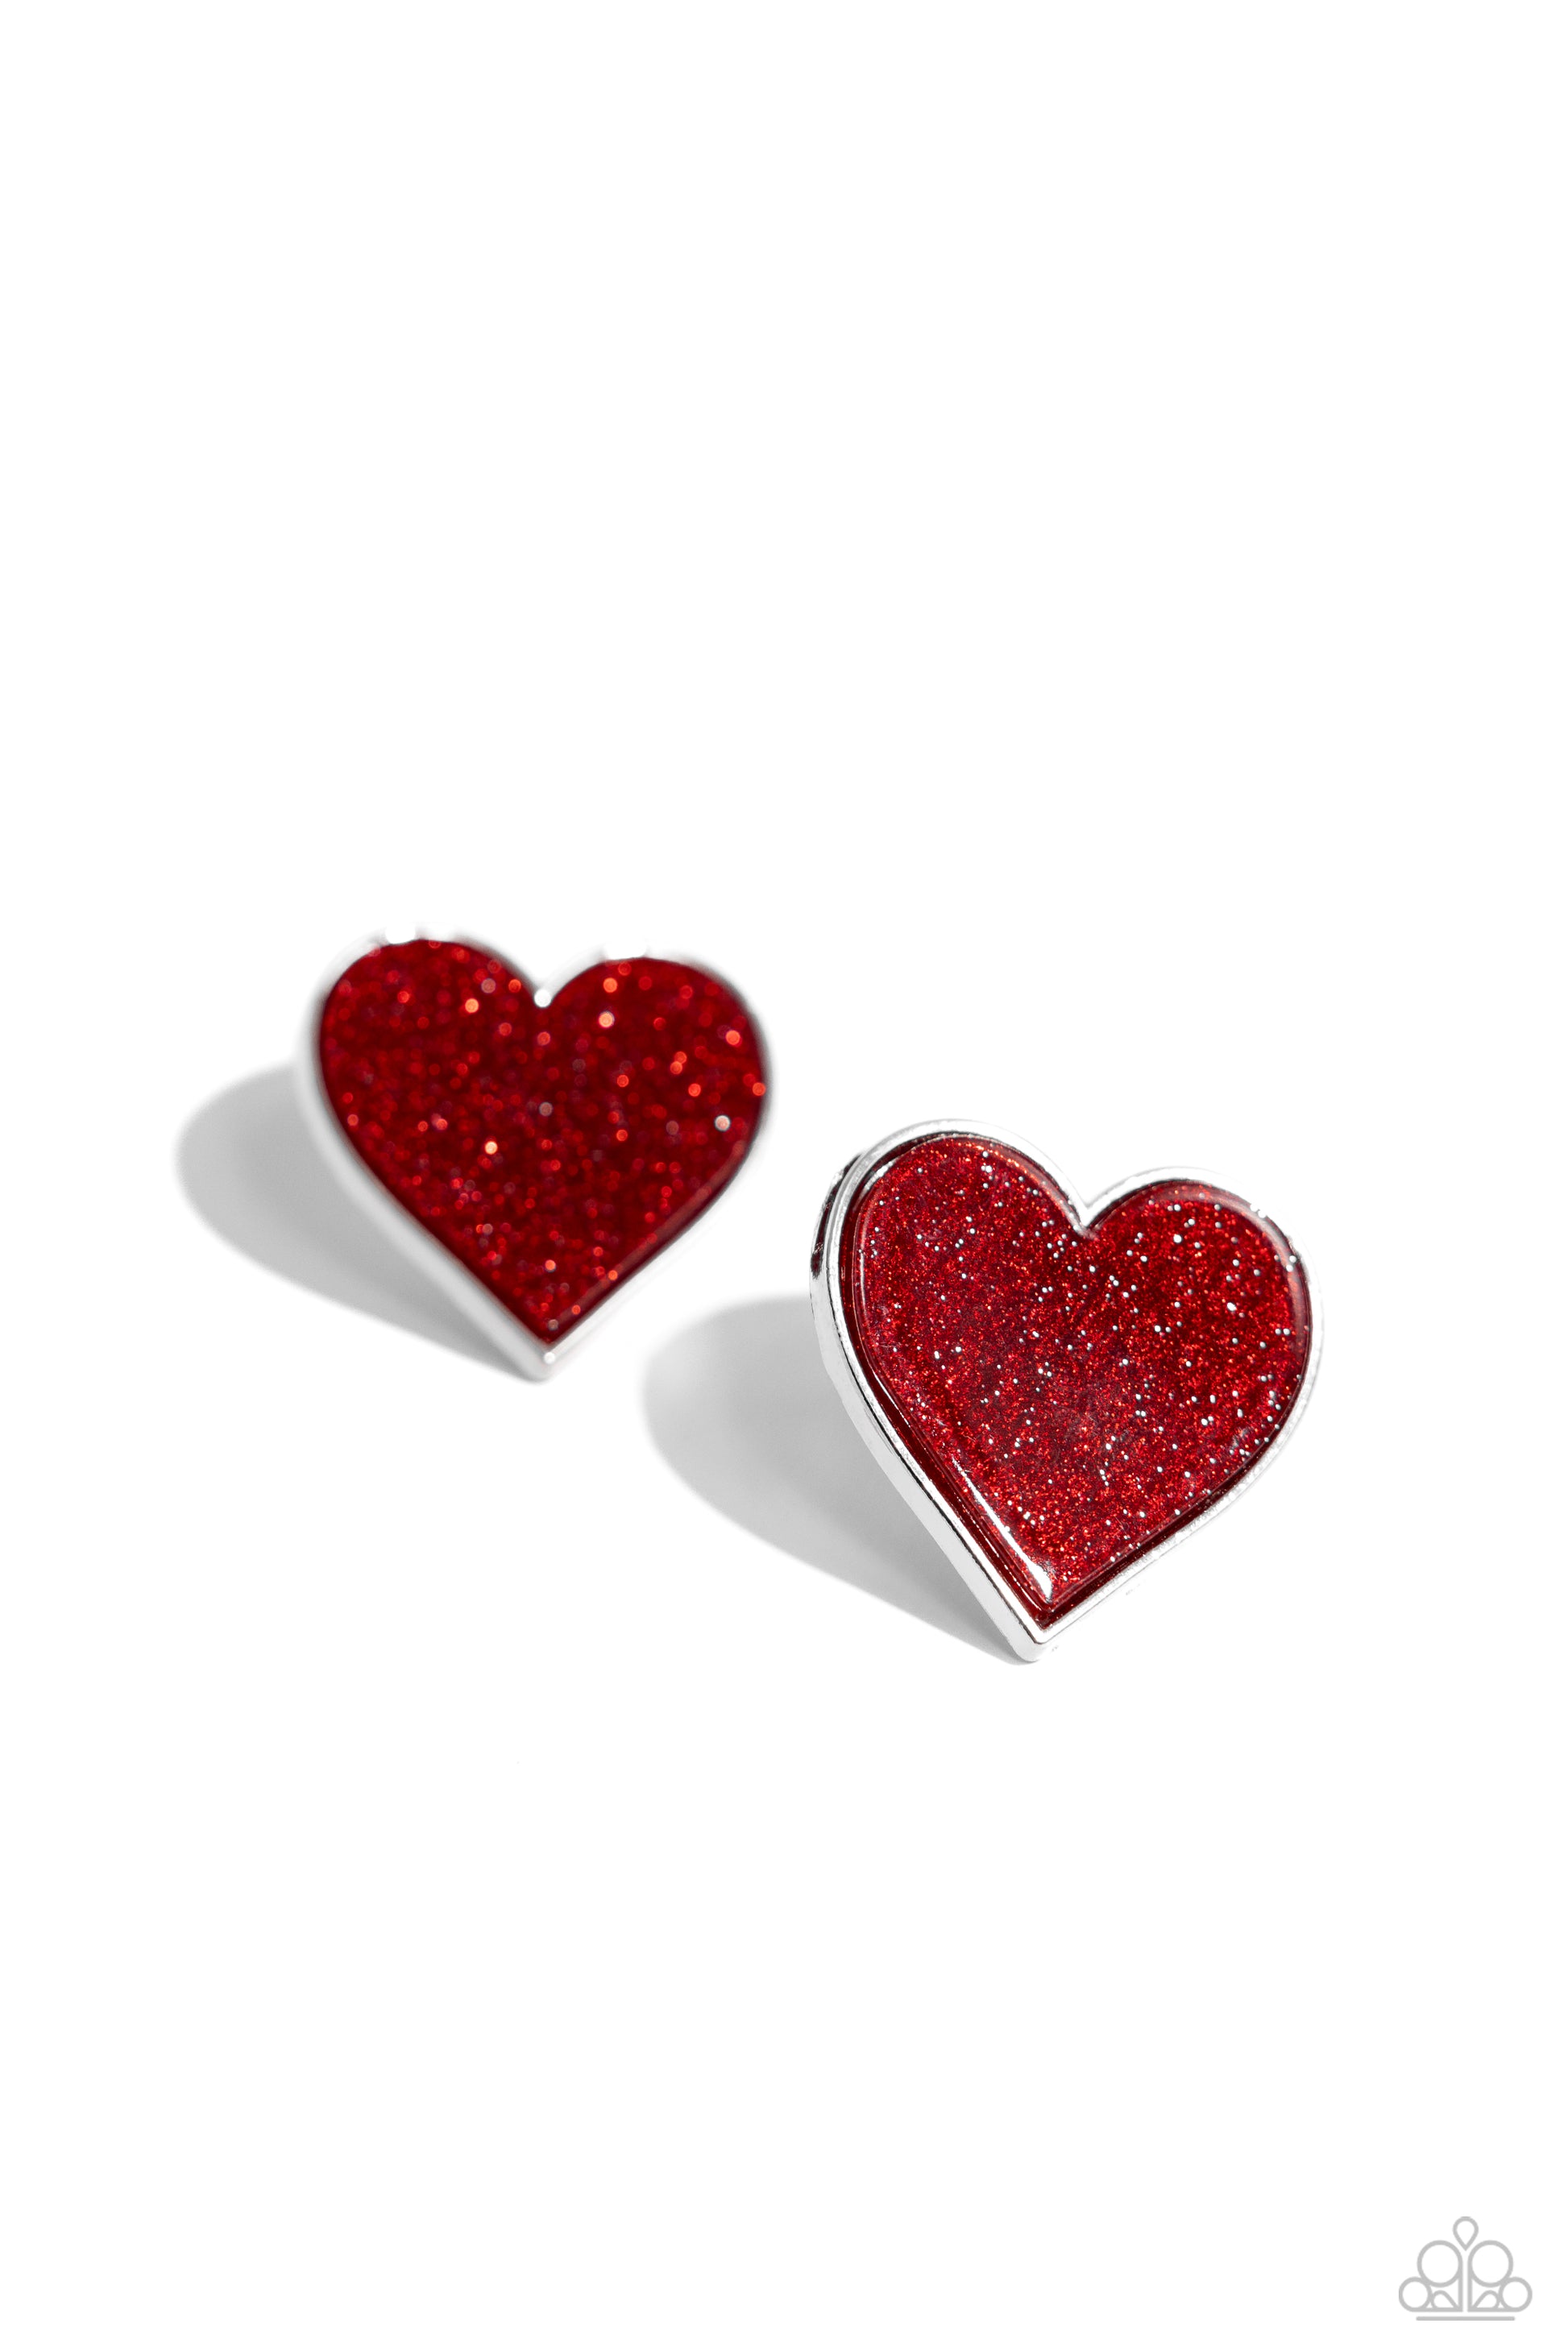 <p>Paparazzi Accessories - Glitter Gamble - Red Heart Earrings dusted in sparkles, red hearts, pressed in sleek silver frames neatly sparkle atop the lobes for a flirtatious centerpiece. Earring attaches to a standard post fitting.</p> <p><i>Sold as one pair of post earrings.</i></p>